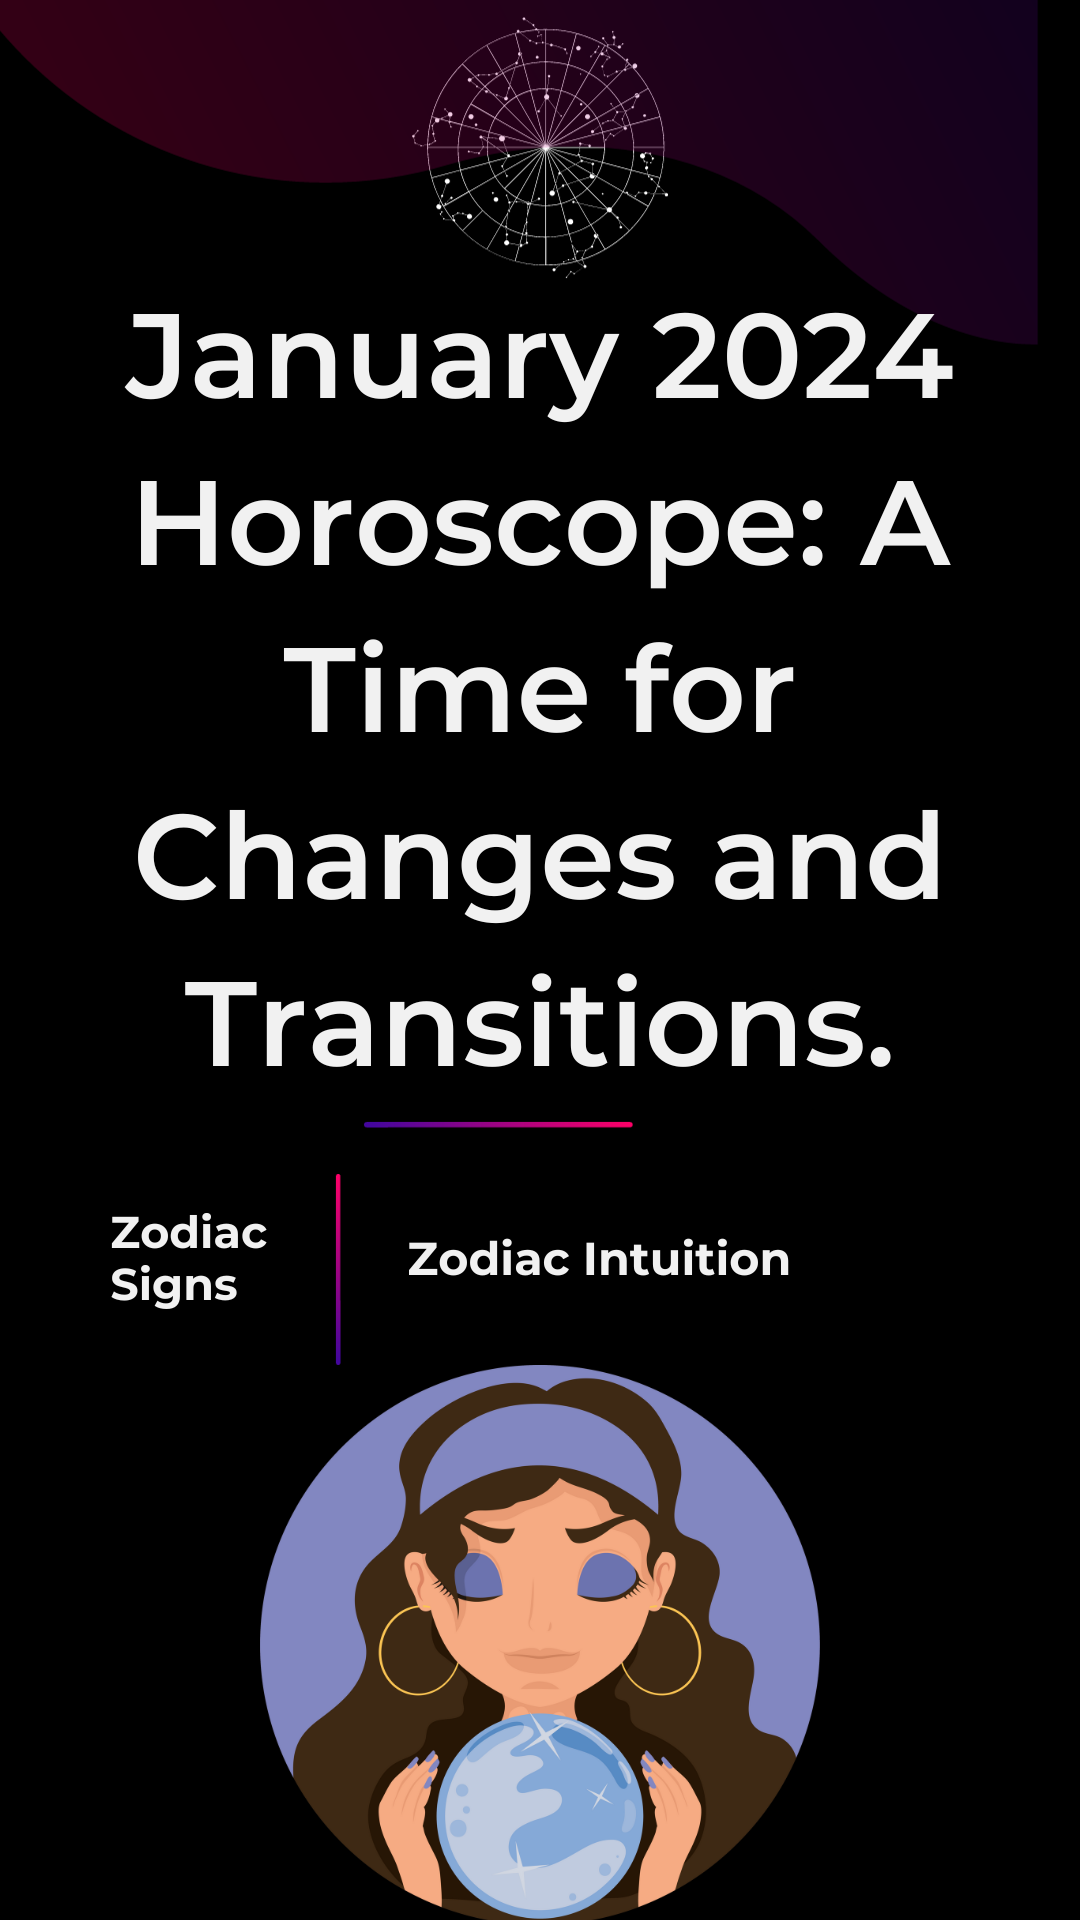 January 2024 Horoscope: A Time for Changes and Transitions.